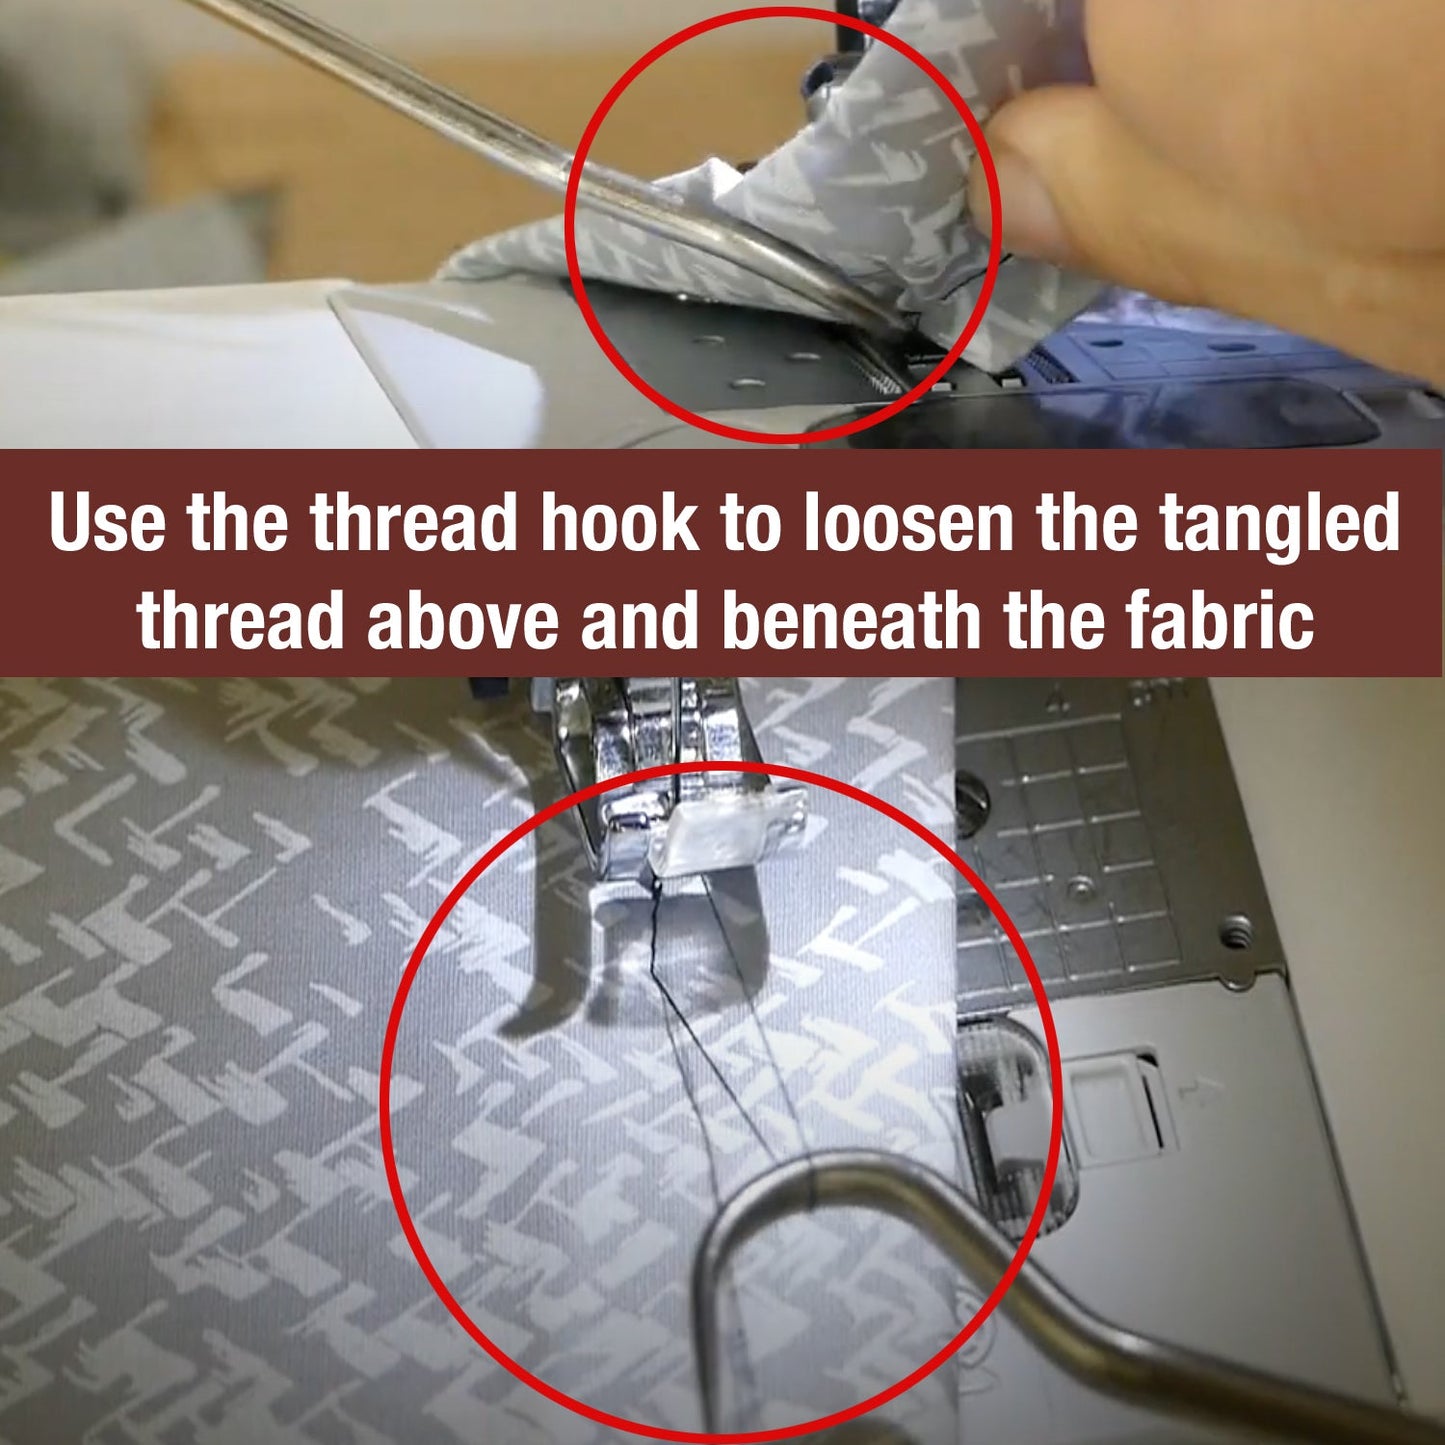 Birds Nest Toolkit - Your Way out of Sewing Machine Birdnesting